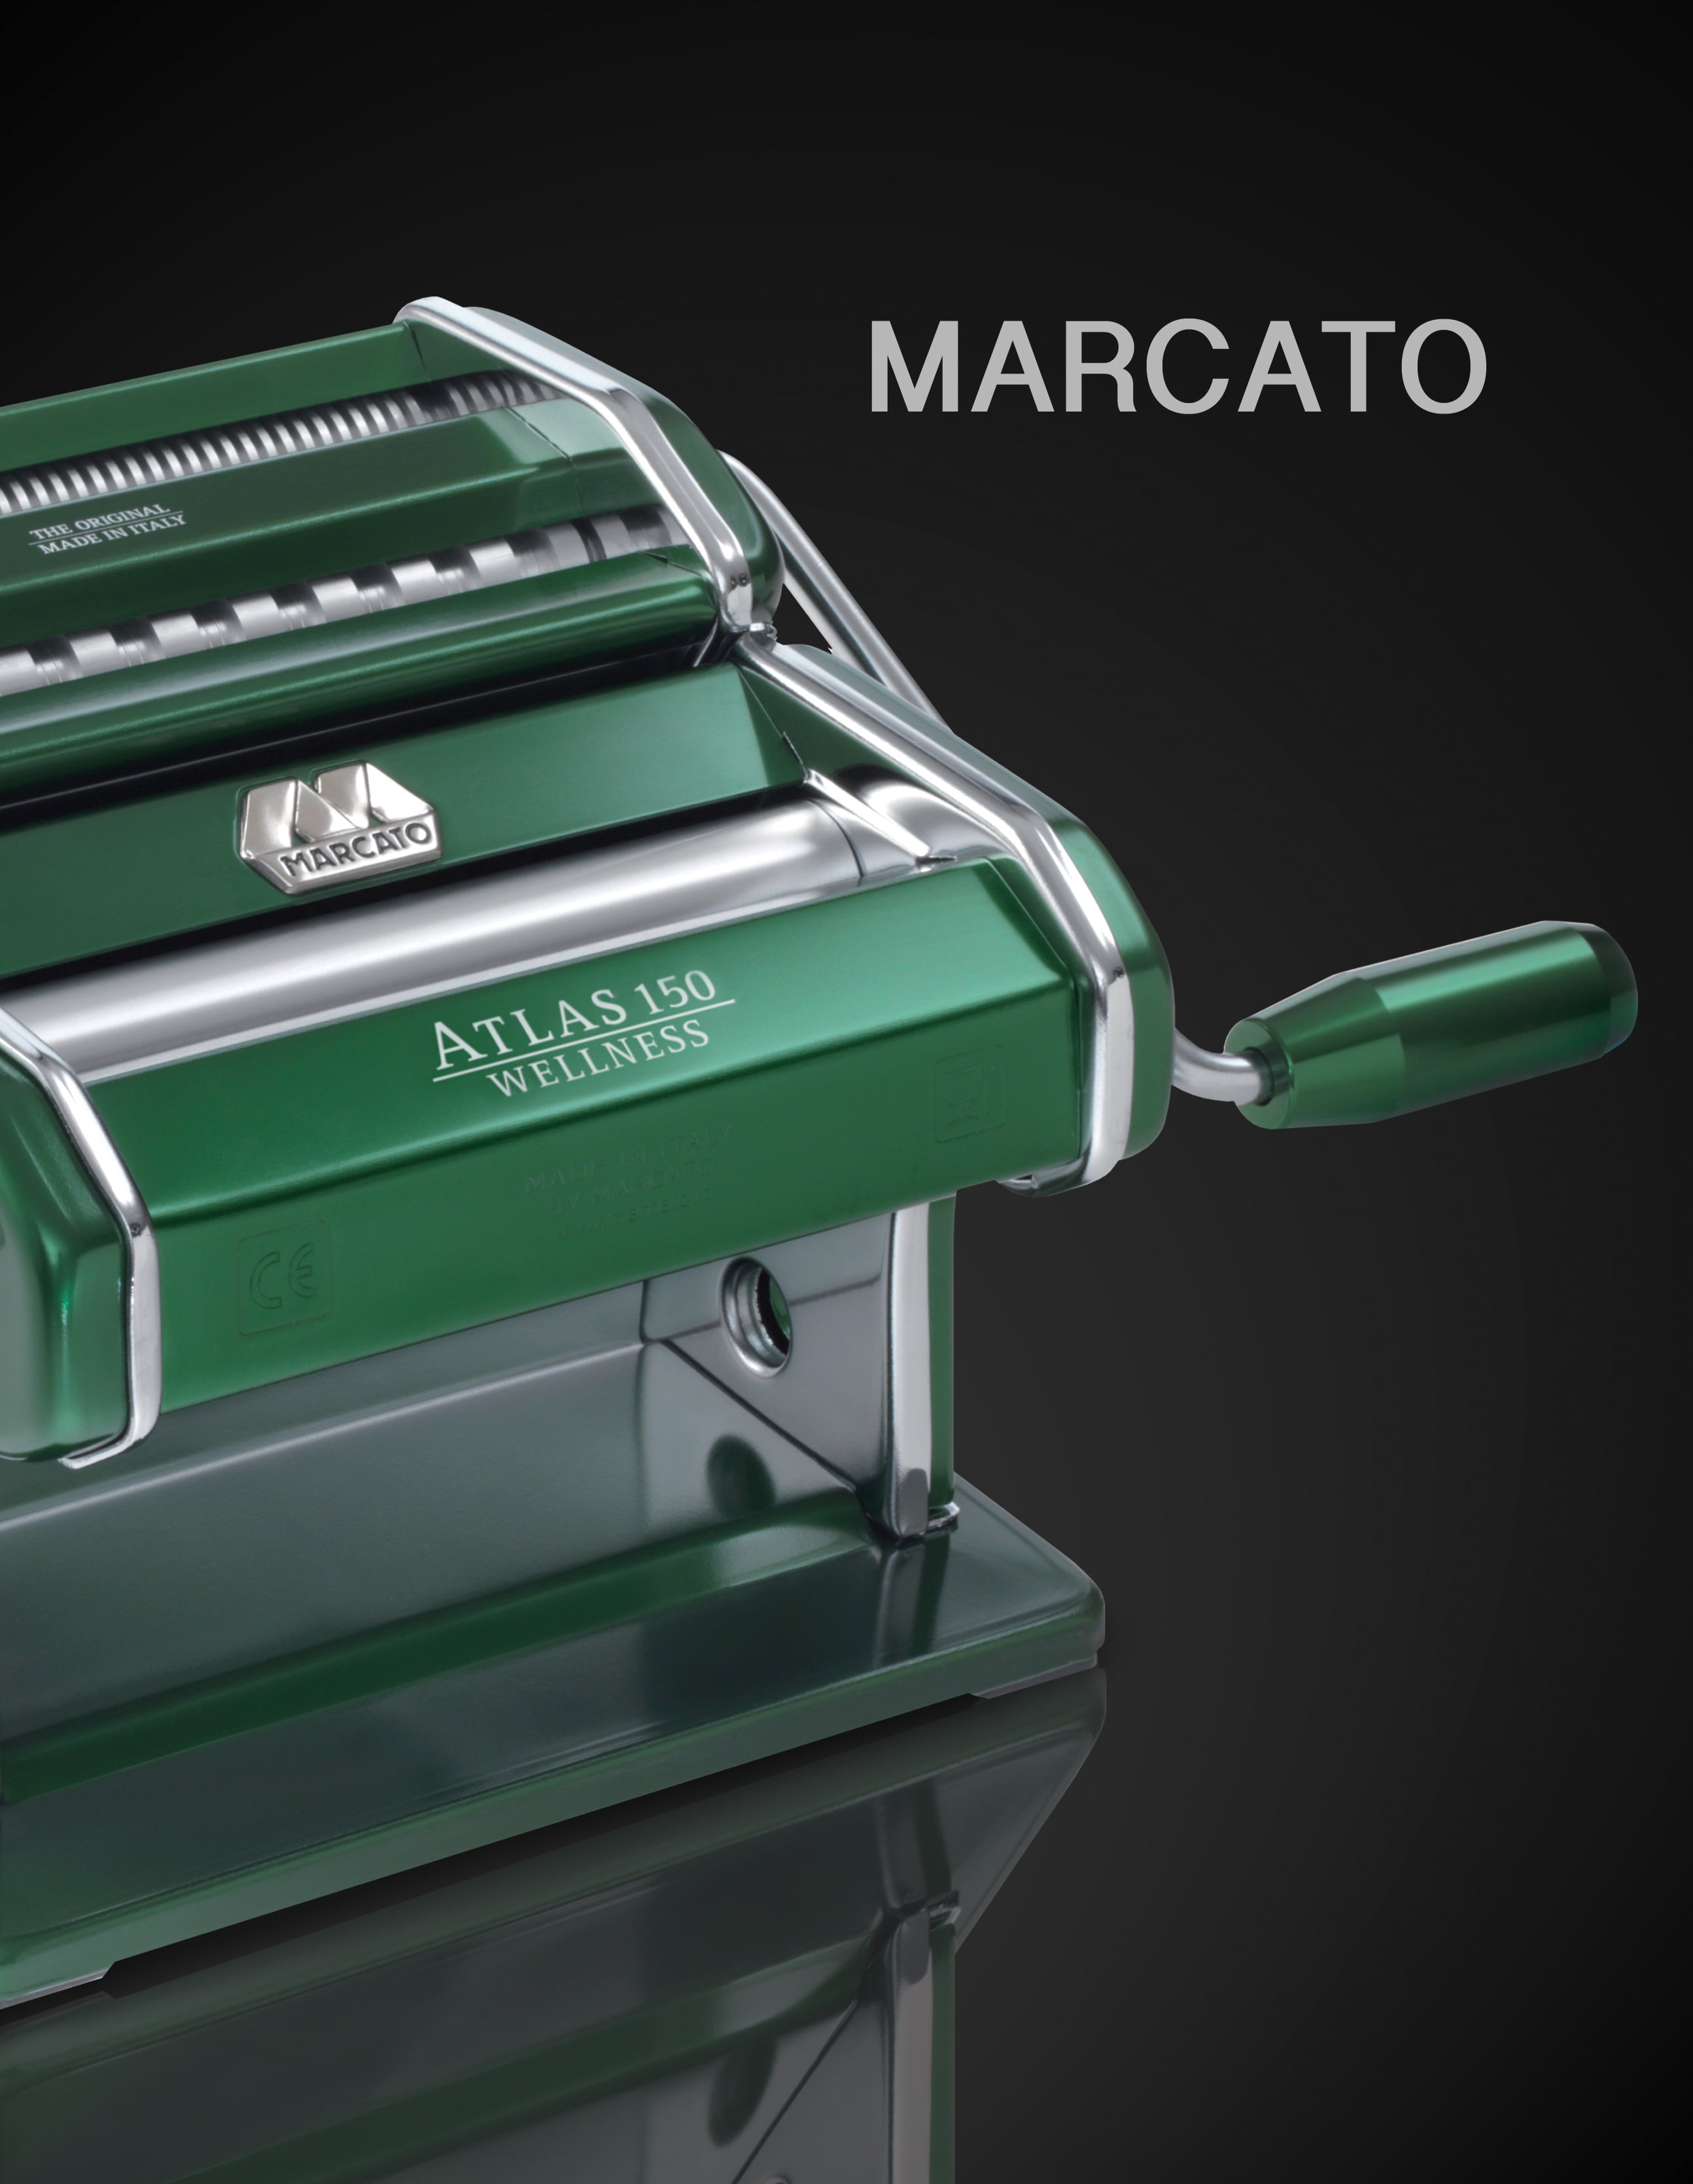 MARCATO Atlas 150 Machine, Made in Italy, Red, Includes Pasta Cutter, Hand  Crank, and Instructions